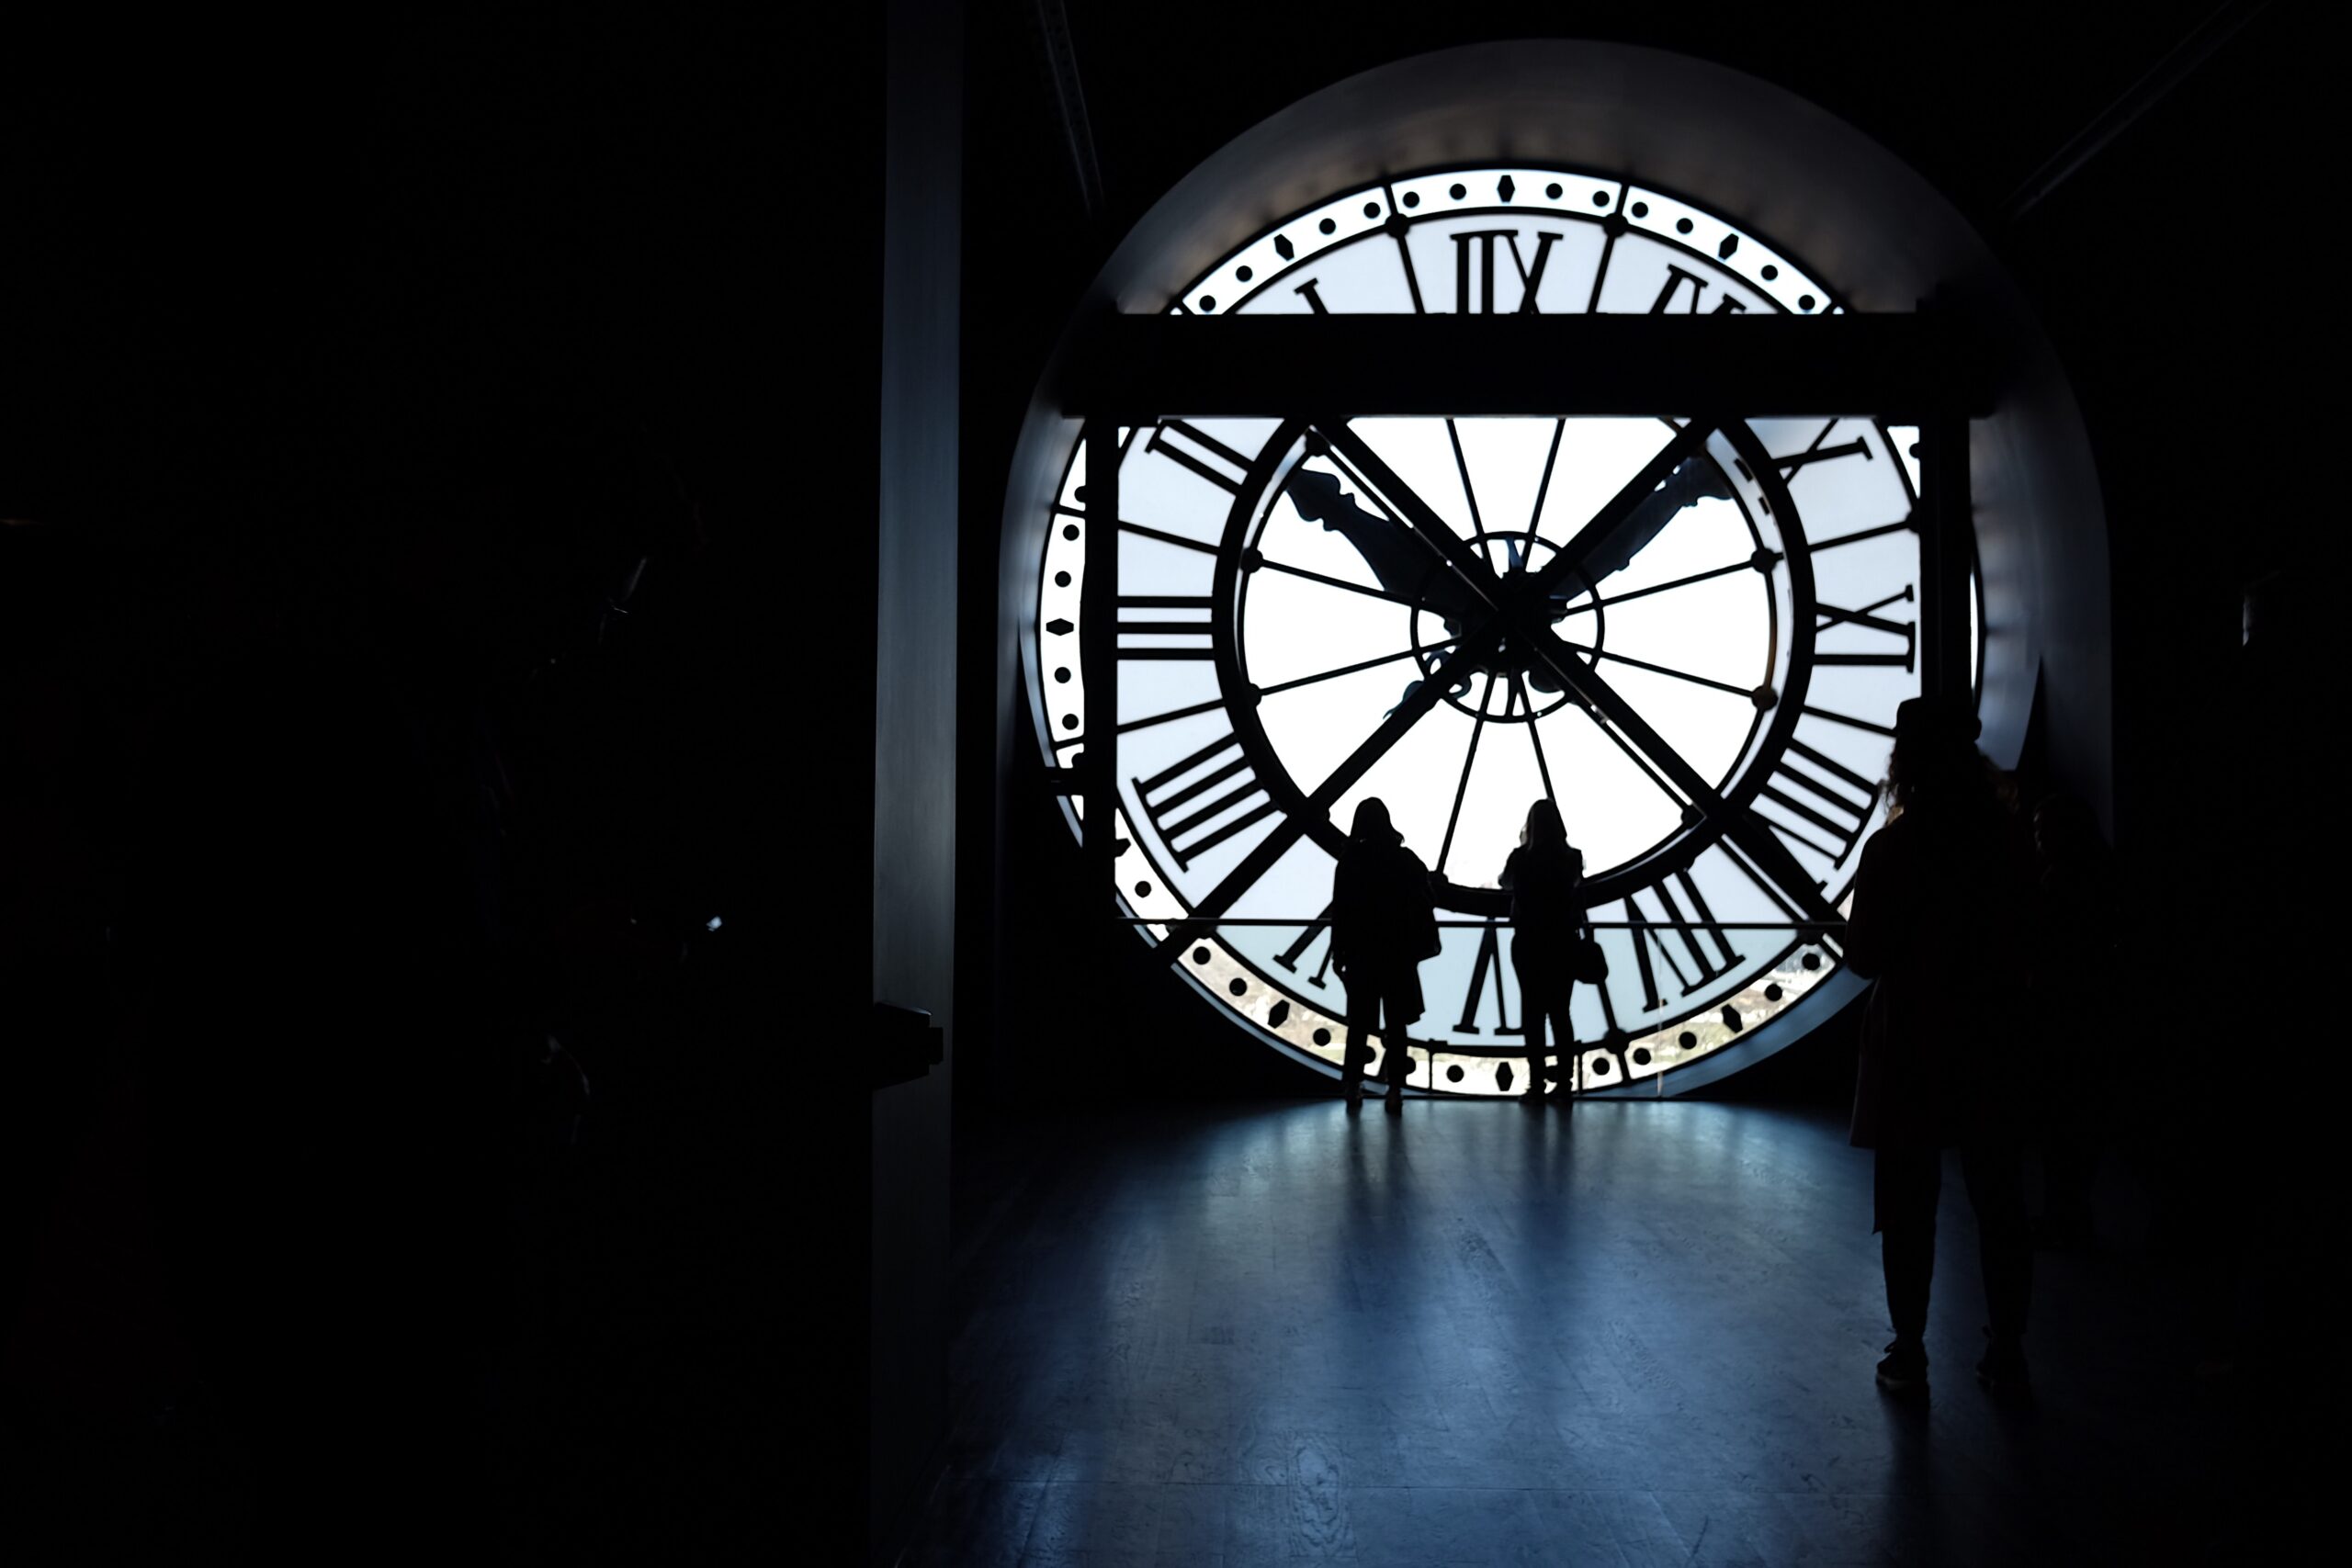 The leap second’s time will be up in 2035—and tech companies are thrilled